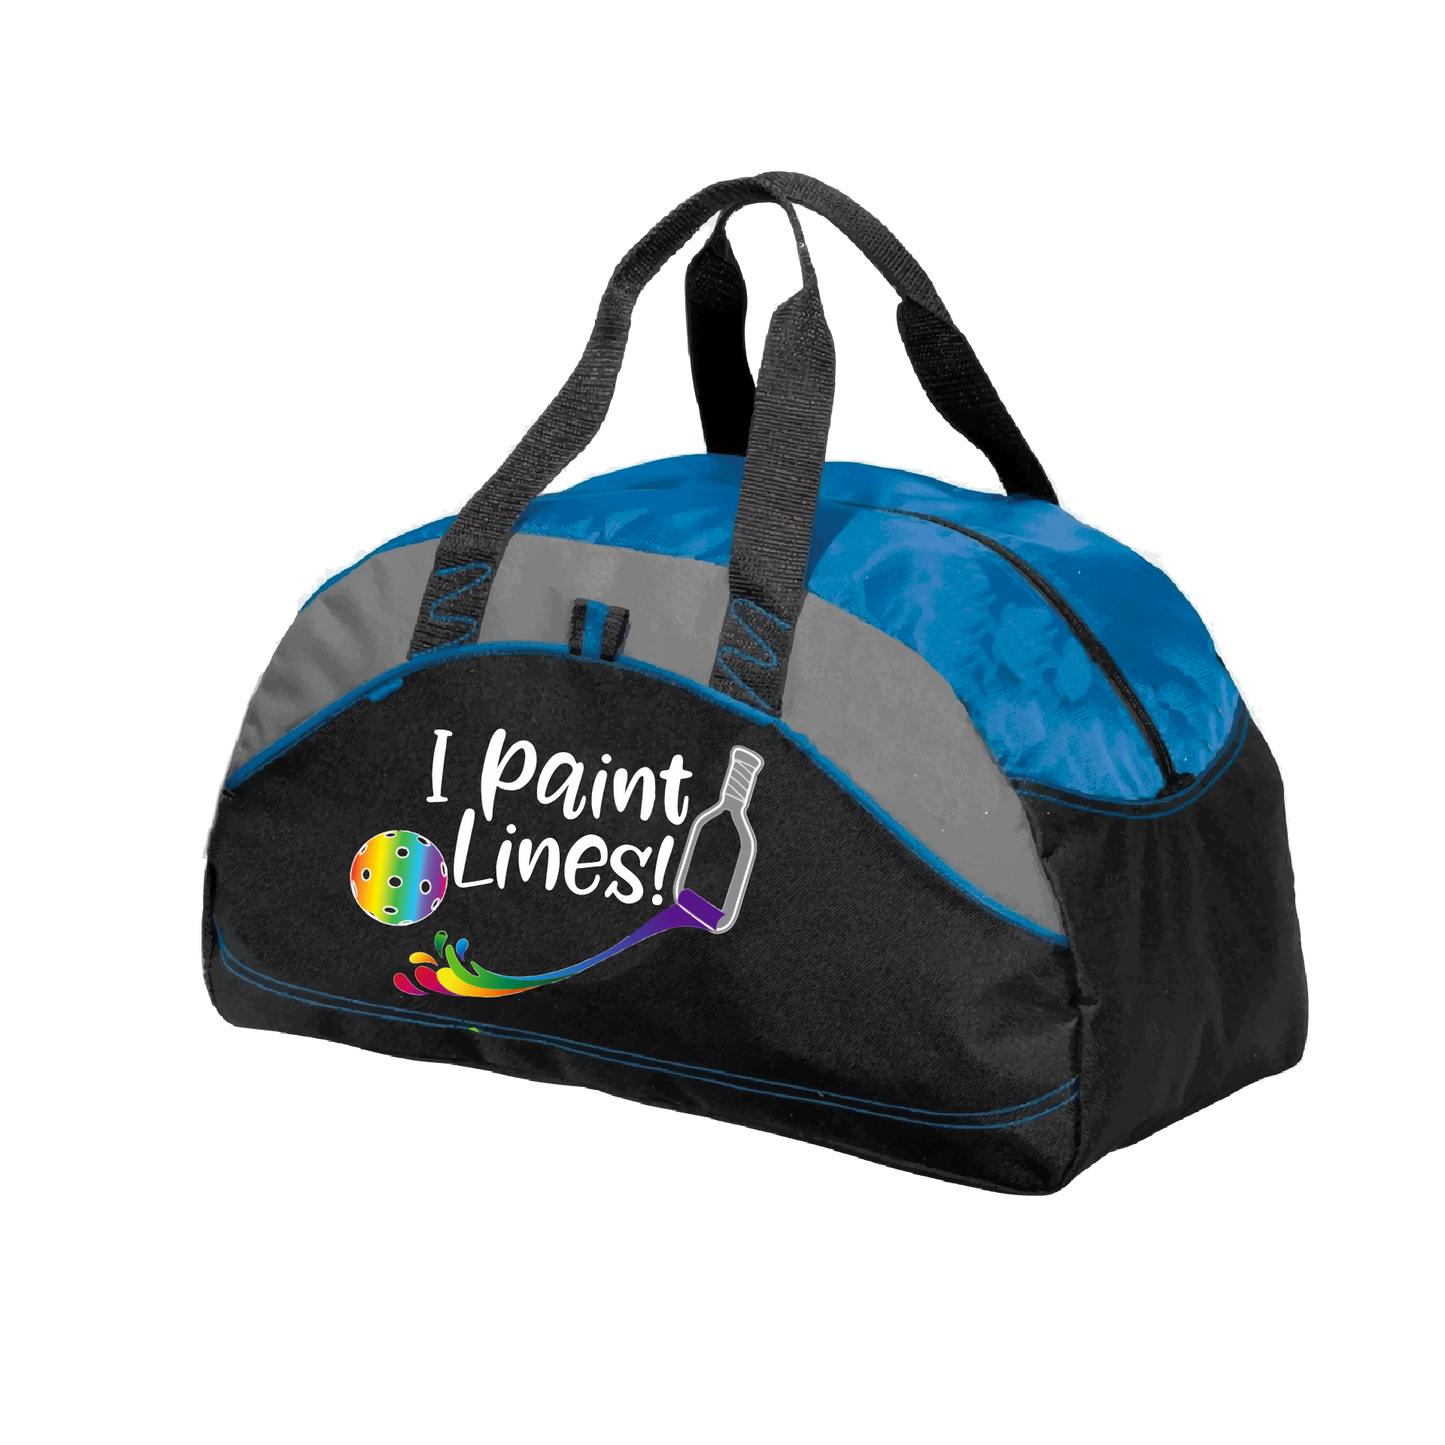 Pickleball Bag Design: I Paint Lines  Carry your gear in comfort and style. This fun pickleball duffel bag is the perfect accessory for all pickleball players needing to keep their gear in one place. This medium sized duffel tote is ideal for all your pickleball activities. The large center compartment allows for plenty of space and the mesh end pocket is perfect for holding a water bottle. Duffel bag comes with an adjustable shoulder strap and the polyester material is durable and easily cleaned.